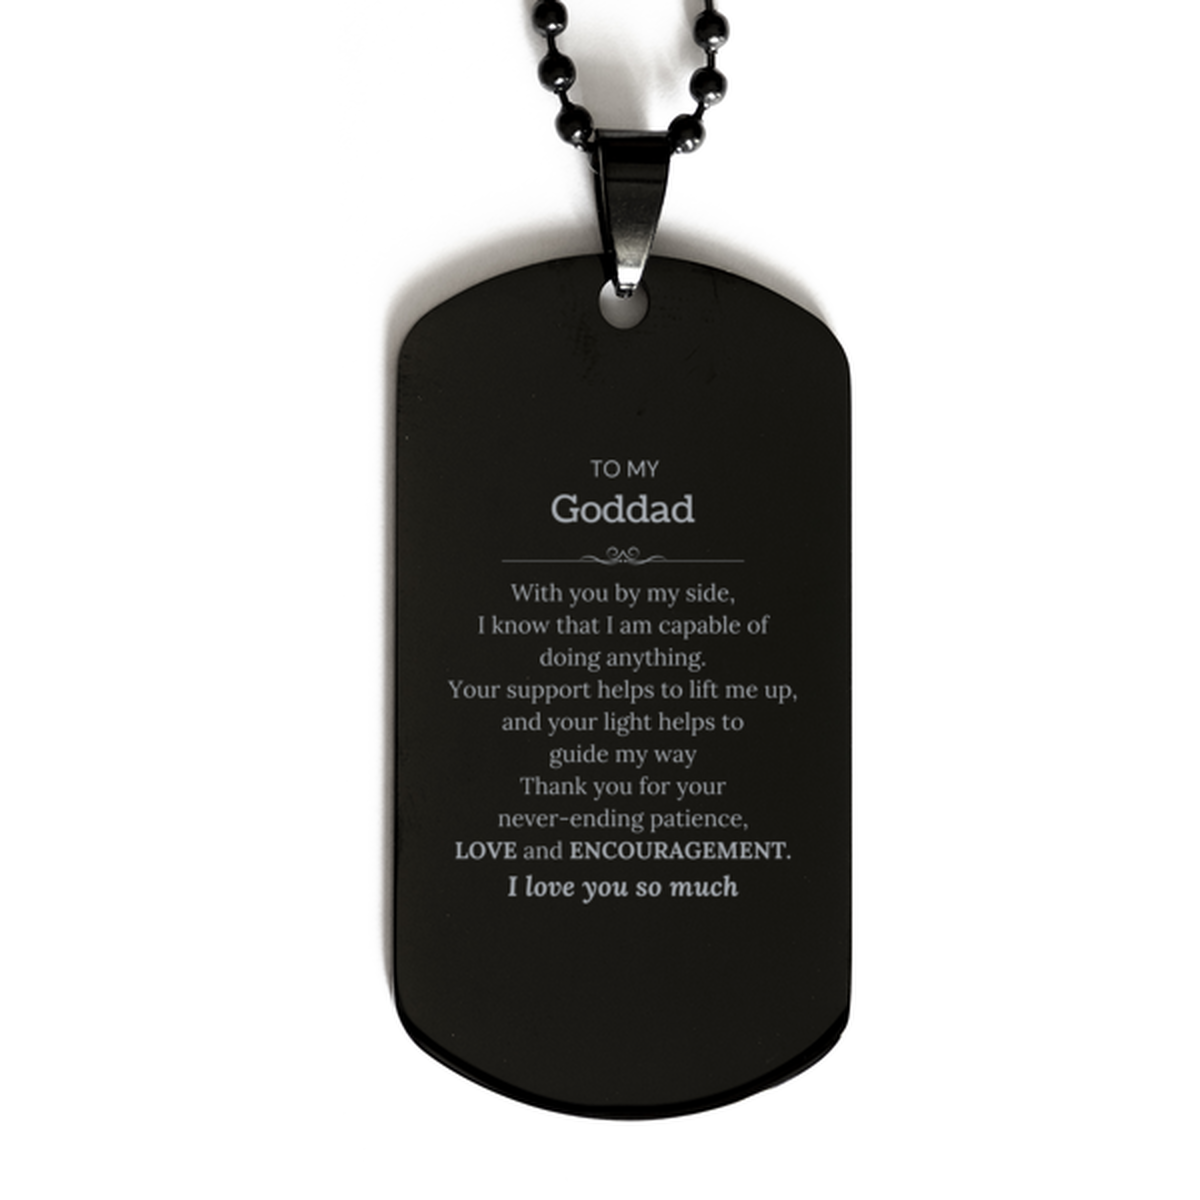 Appreciation Goddad Black Dog Tag Gifts, To My Goddad Birthday Christmas Wedding Keepsake Gifts for Goddad With you by my side, I know that I am capable of doing anything. I love you so much